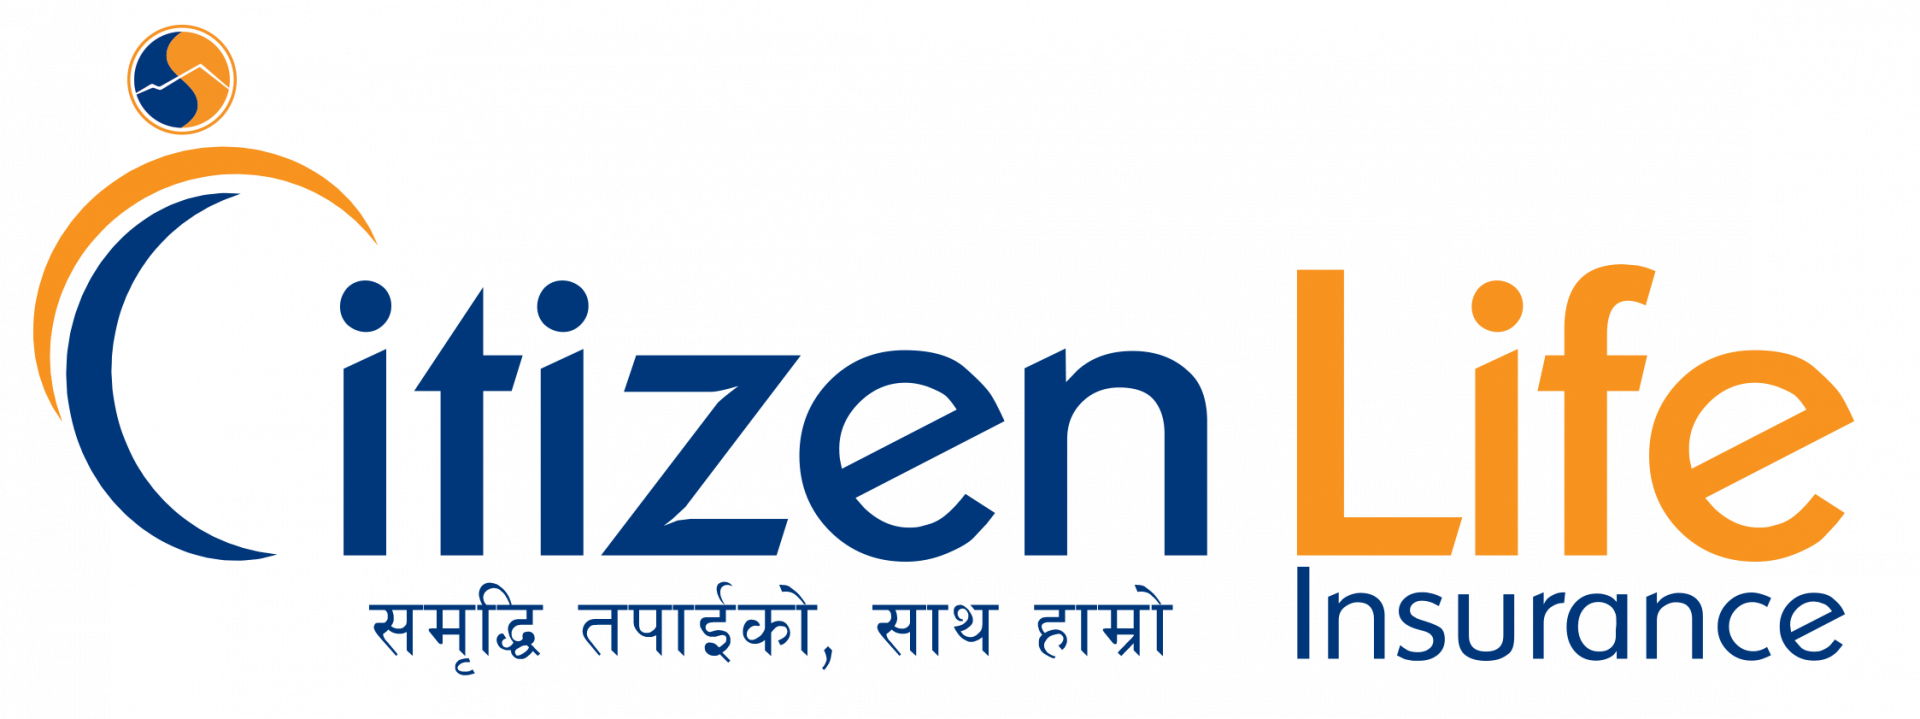 Citizen Life launches ‘Digital Insurance Policy’